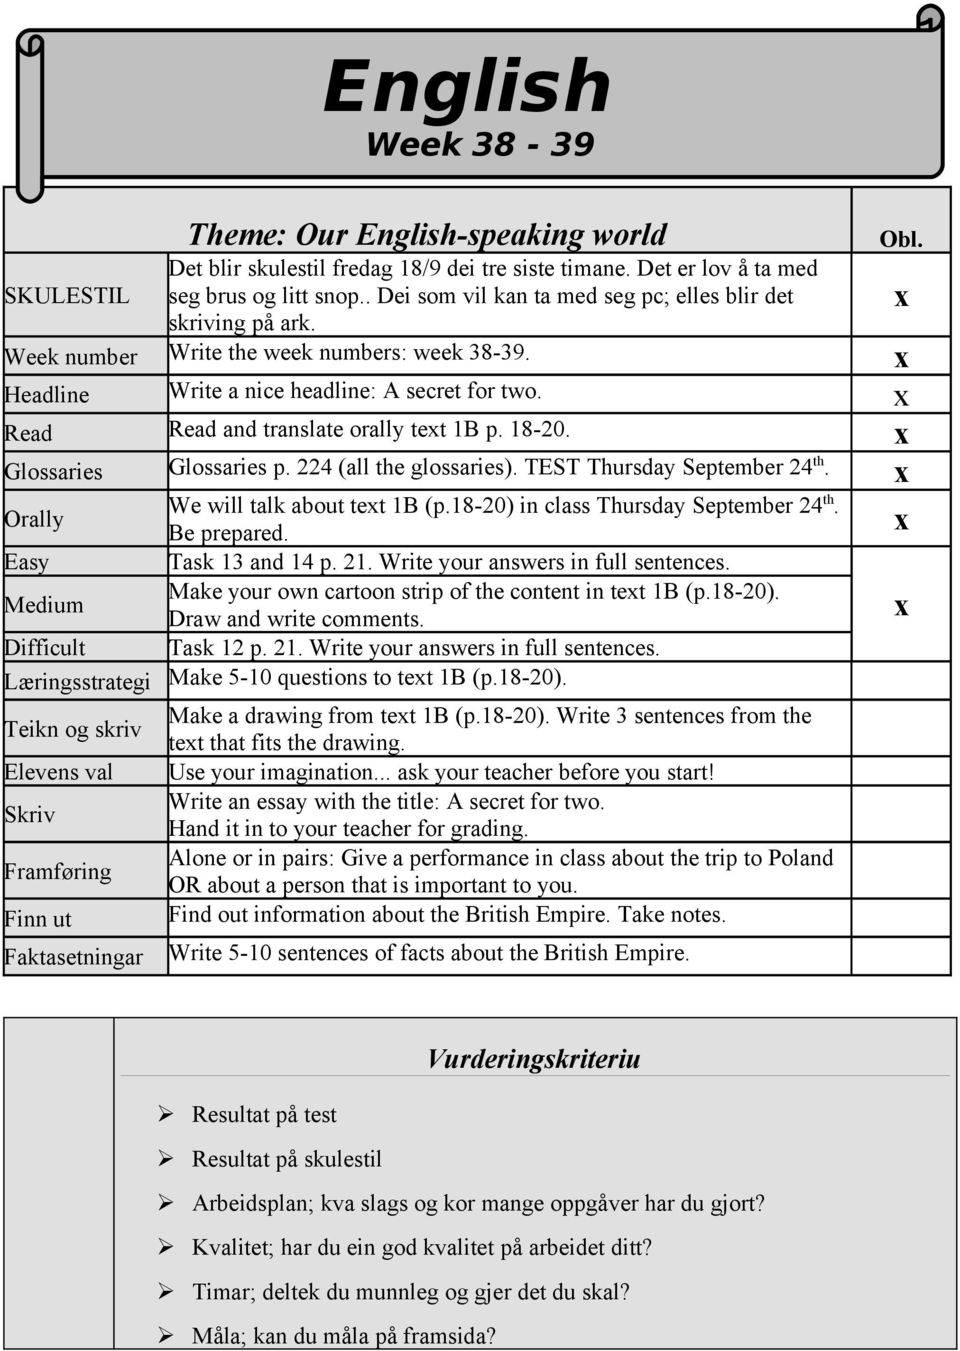 x Read Read and translate orally text 1B p. 18-20. x Glossaries Glossaries p. 224 (all the glossaries). TEST Thursday September 24 th. x Orally We will talk about text 1B (p.